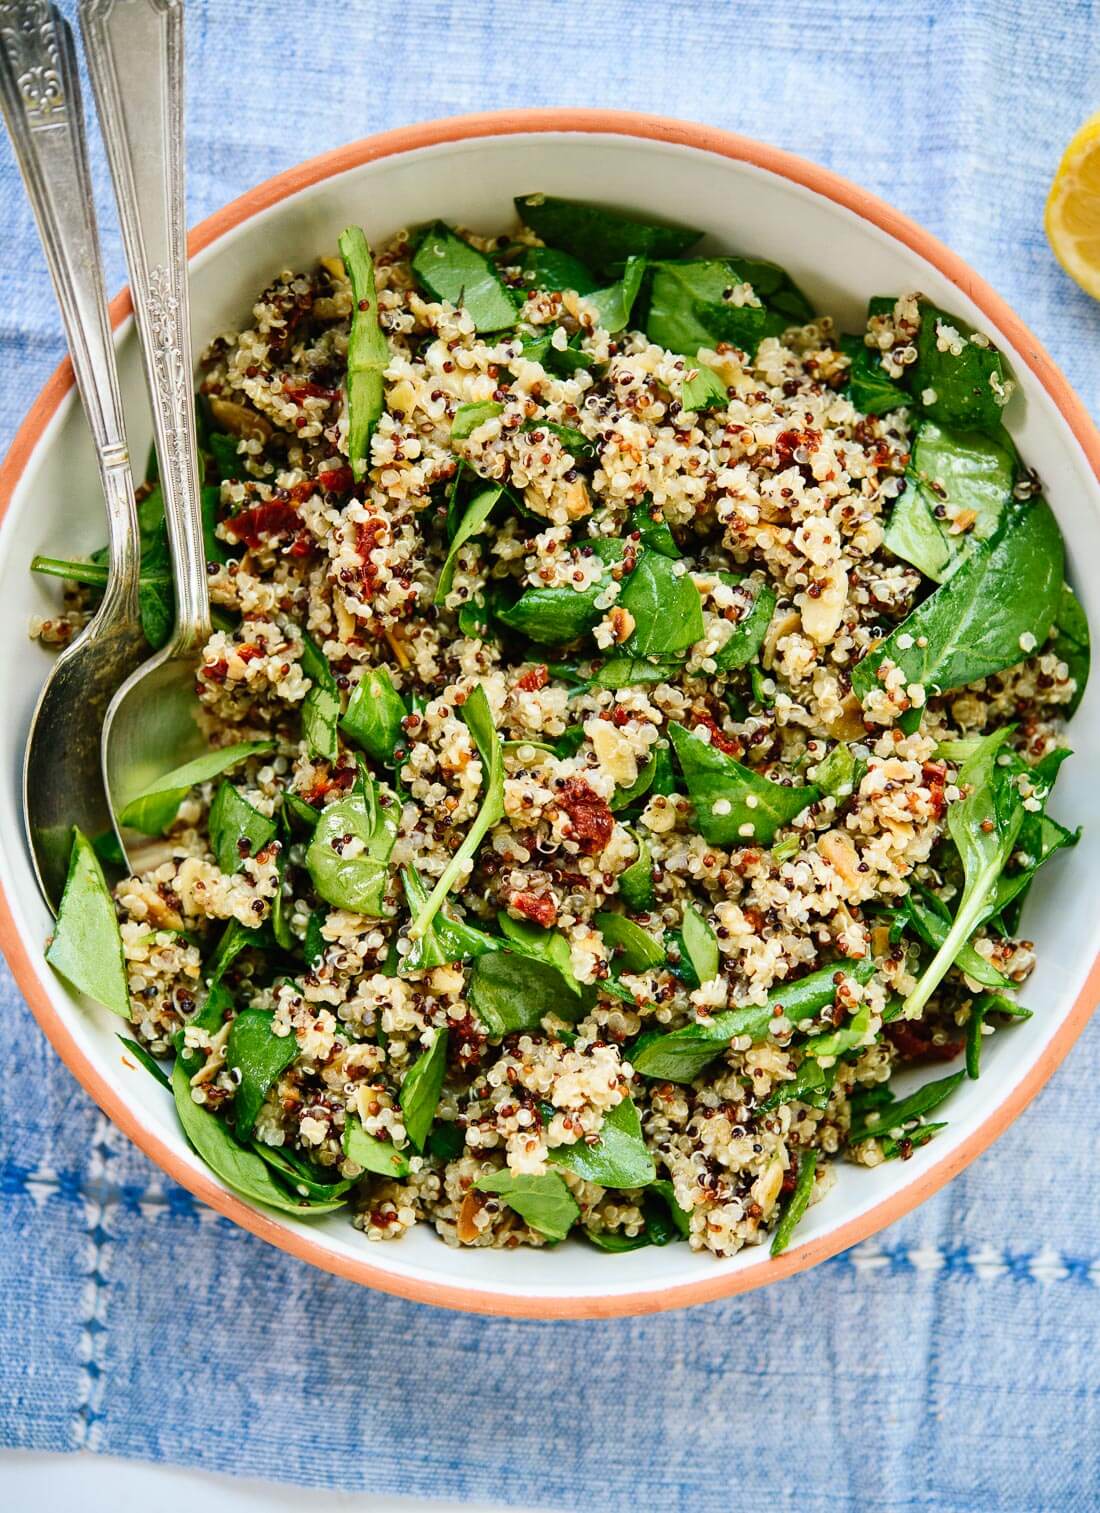 Warm Quinoa Salad: Light, Quick and Easy in VitaClay!